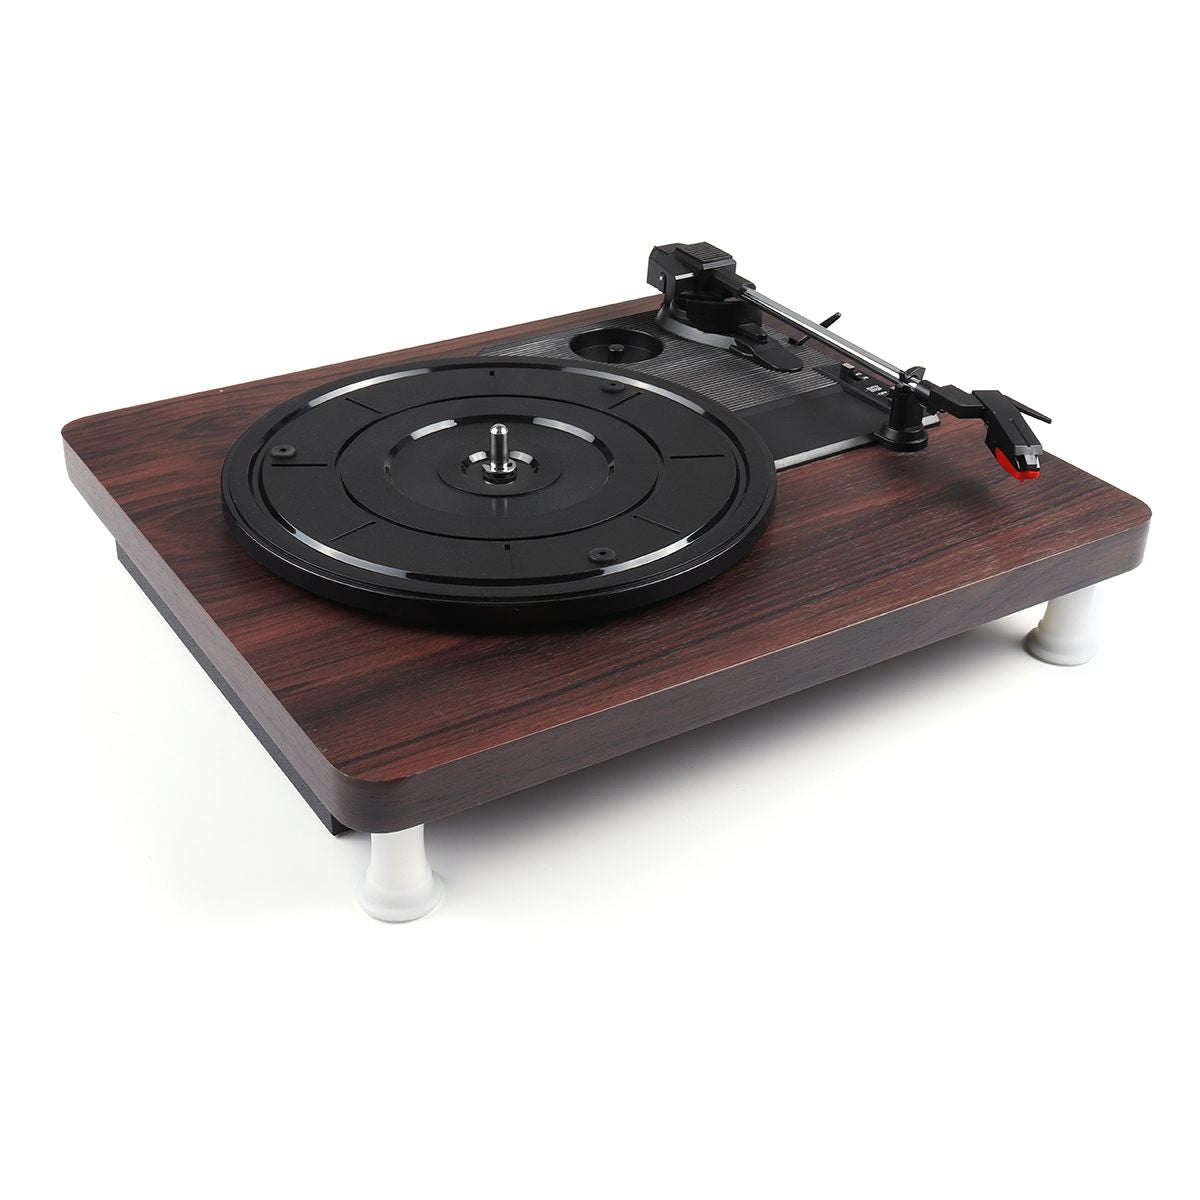 Klimatiske bjerge undulate melodrama Modern Class Vinyl Record Player by Groove Train (33, 45, 78 RPM) Classy  Wood Finish Home Audio Vinyl Music Player for Records